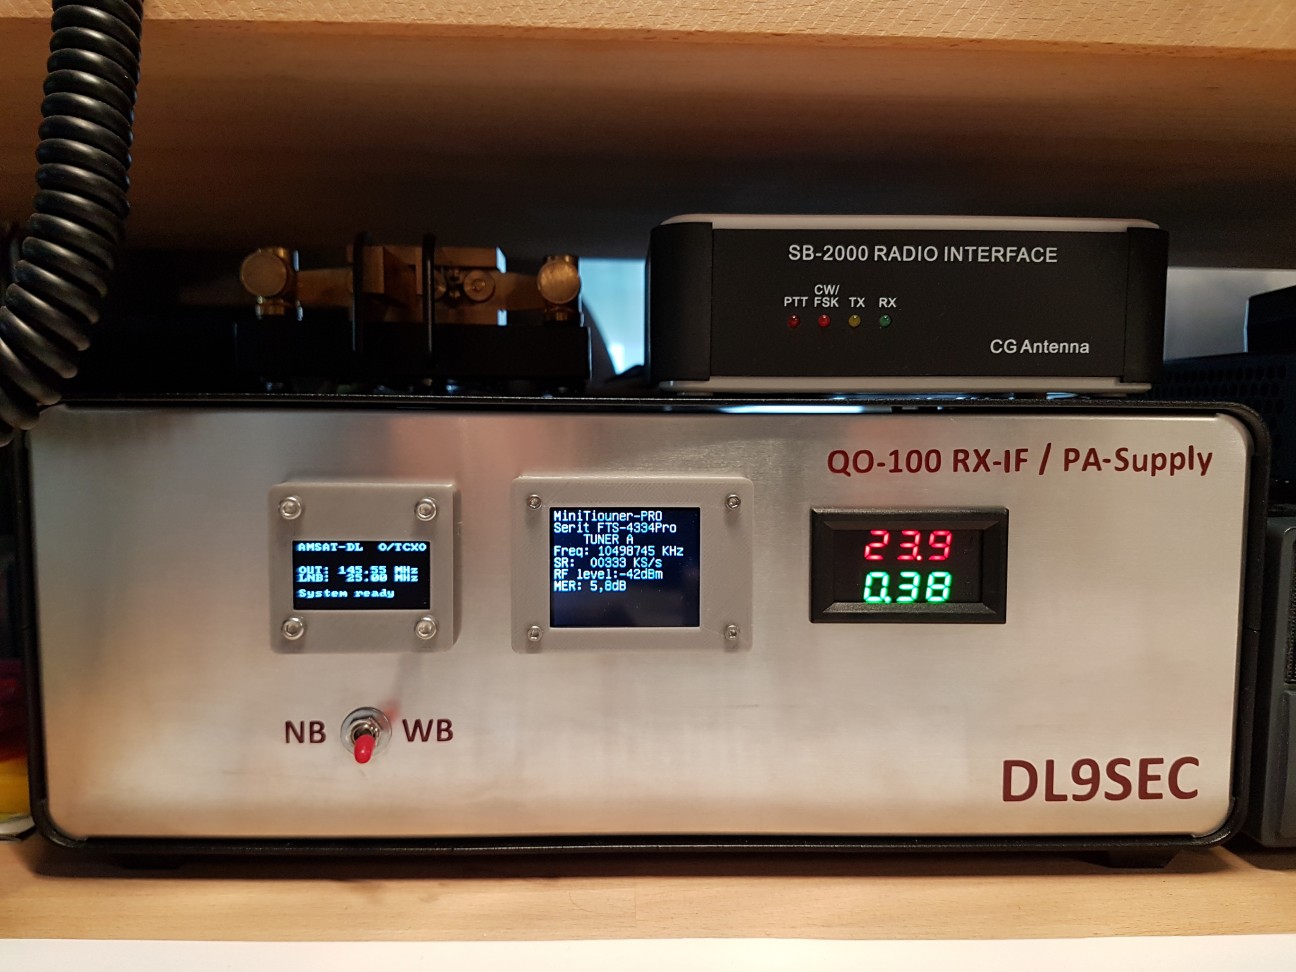 RX-IF, PA-supply and DATV receiver